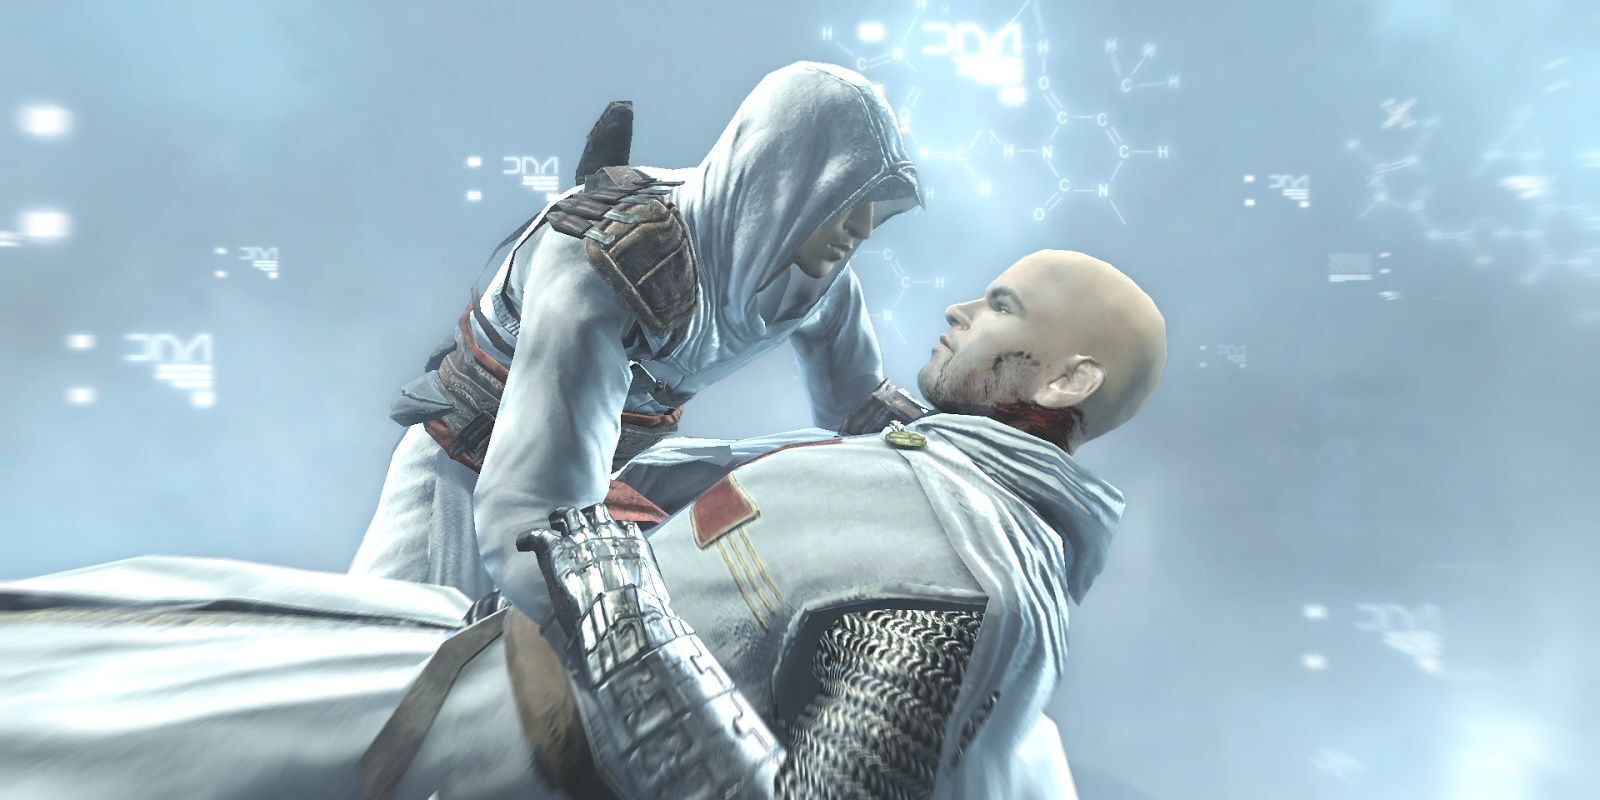 Altair and Templar in Assassins Creed